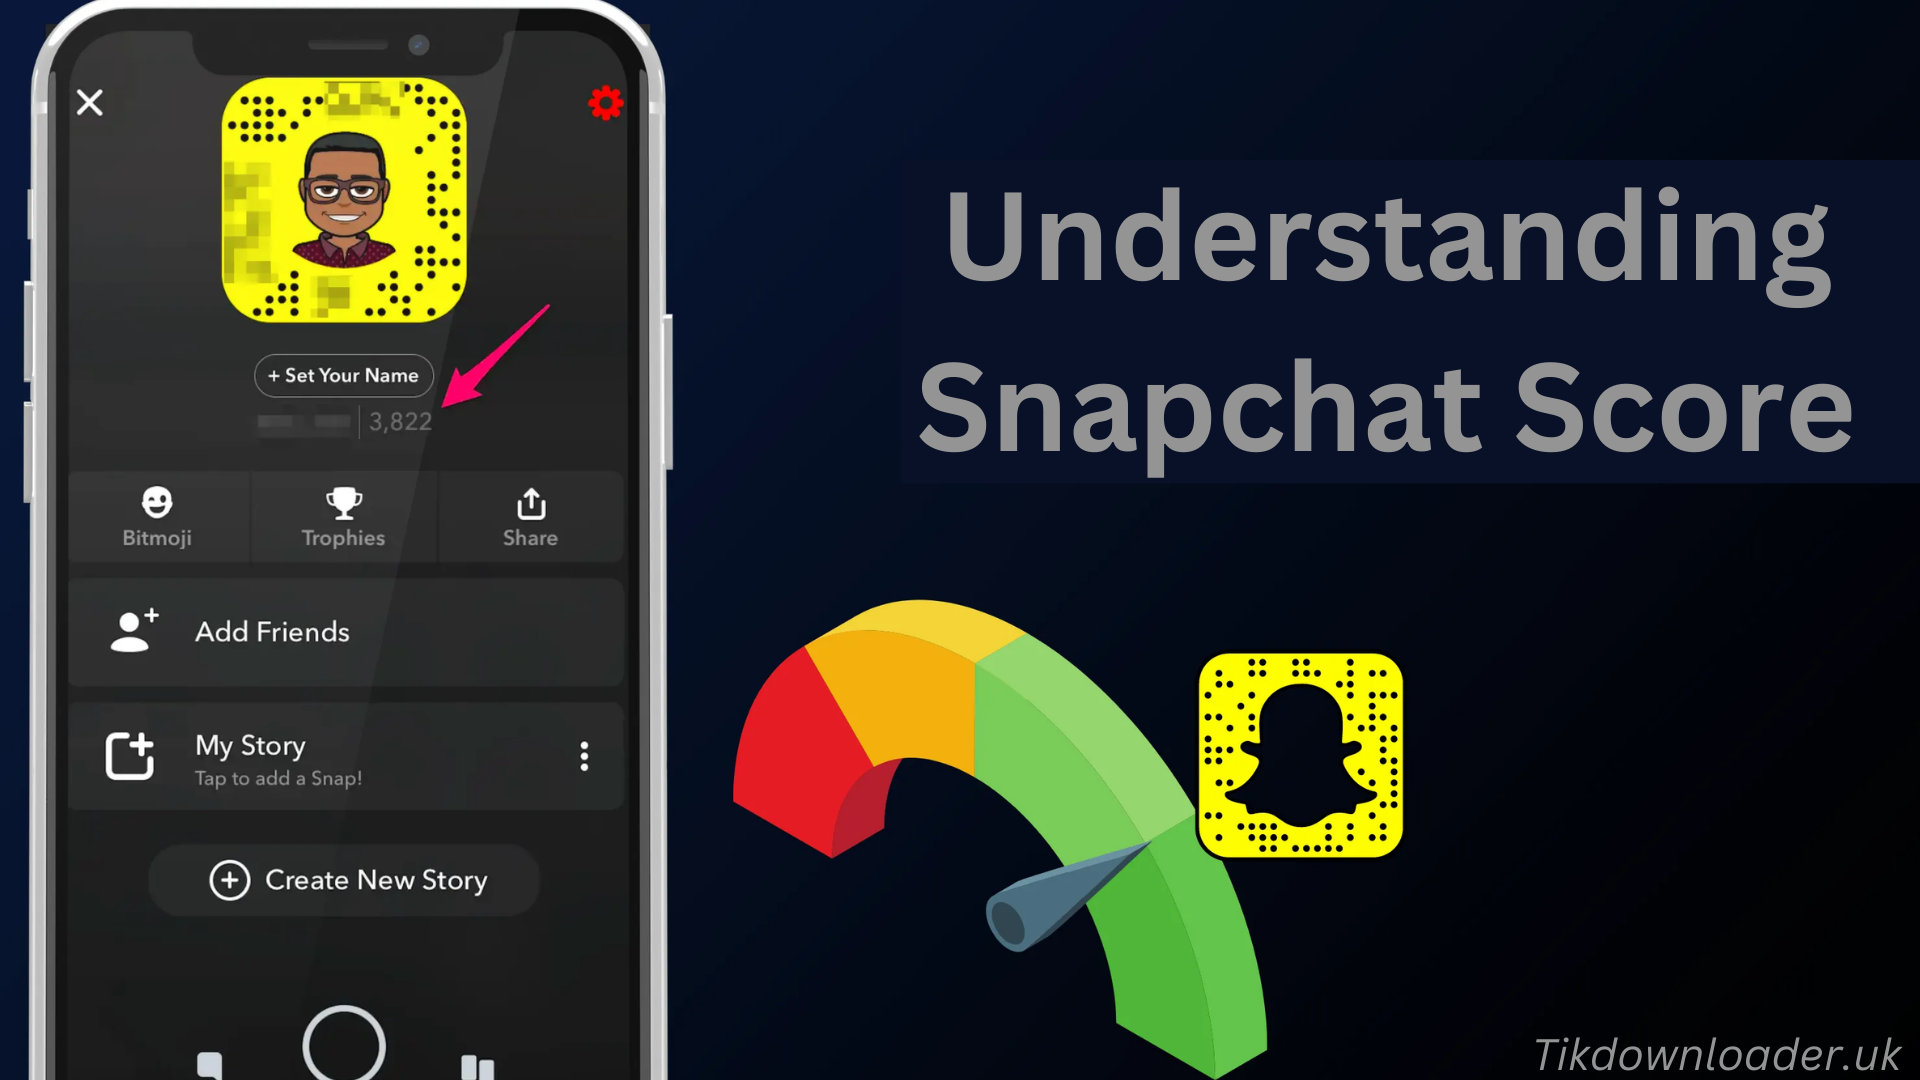 Snap Up Your Score: The Ultimate Snapchat Score Booster Guide